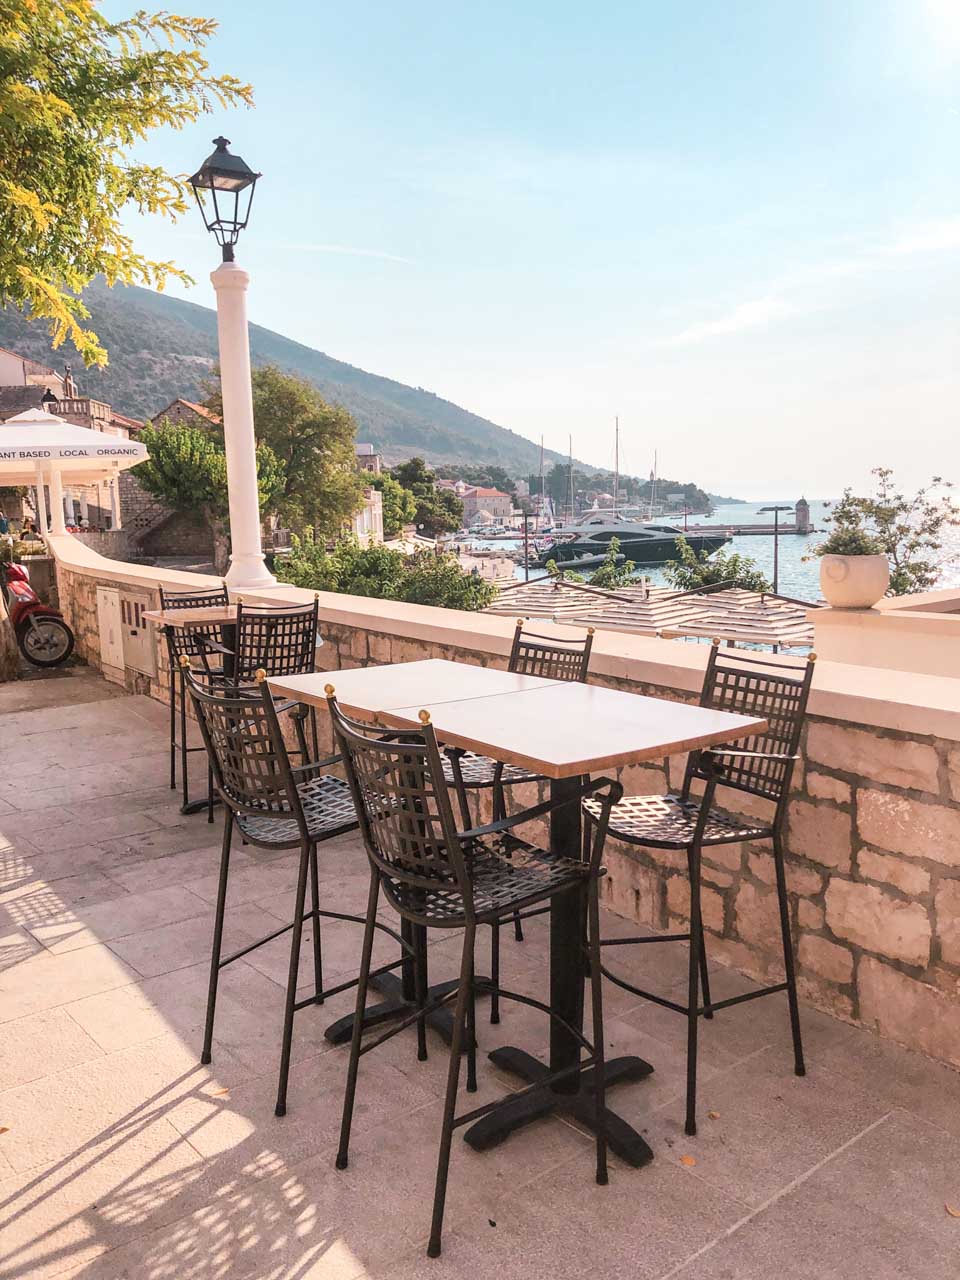 A table with chairs on an outdoor terrace in Bol, Croatia